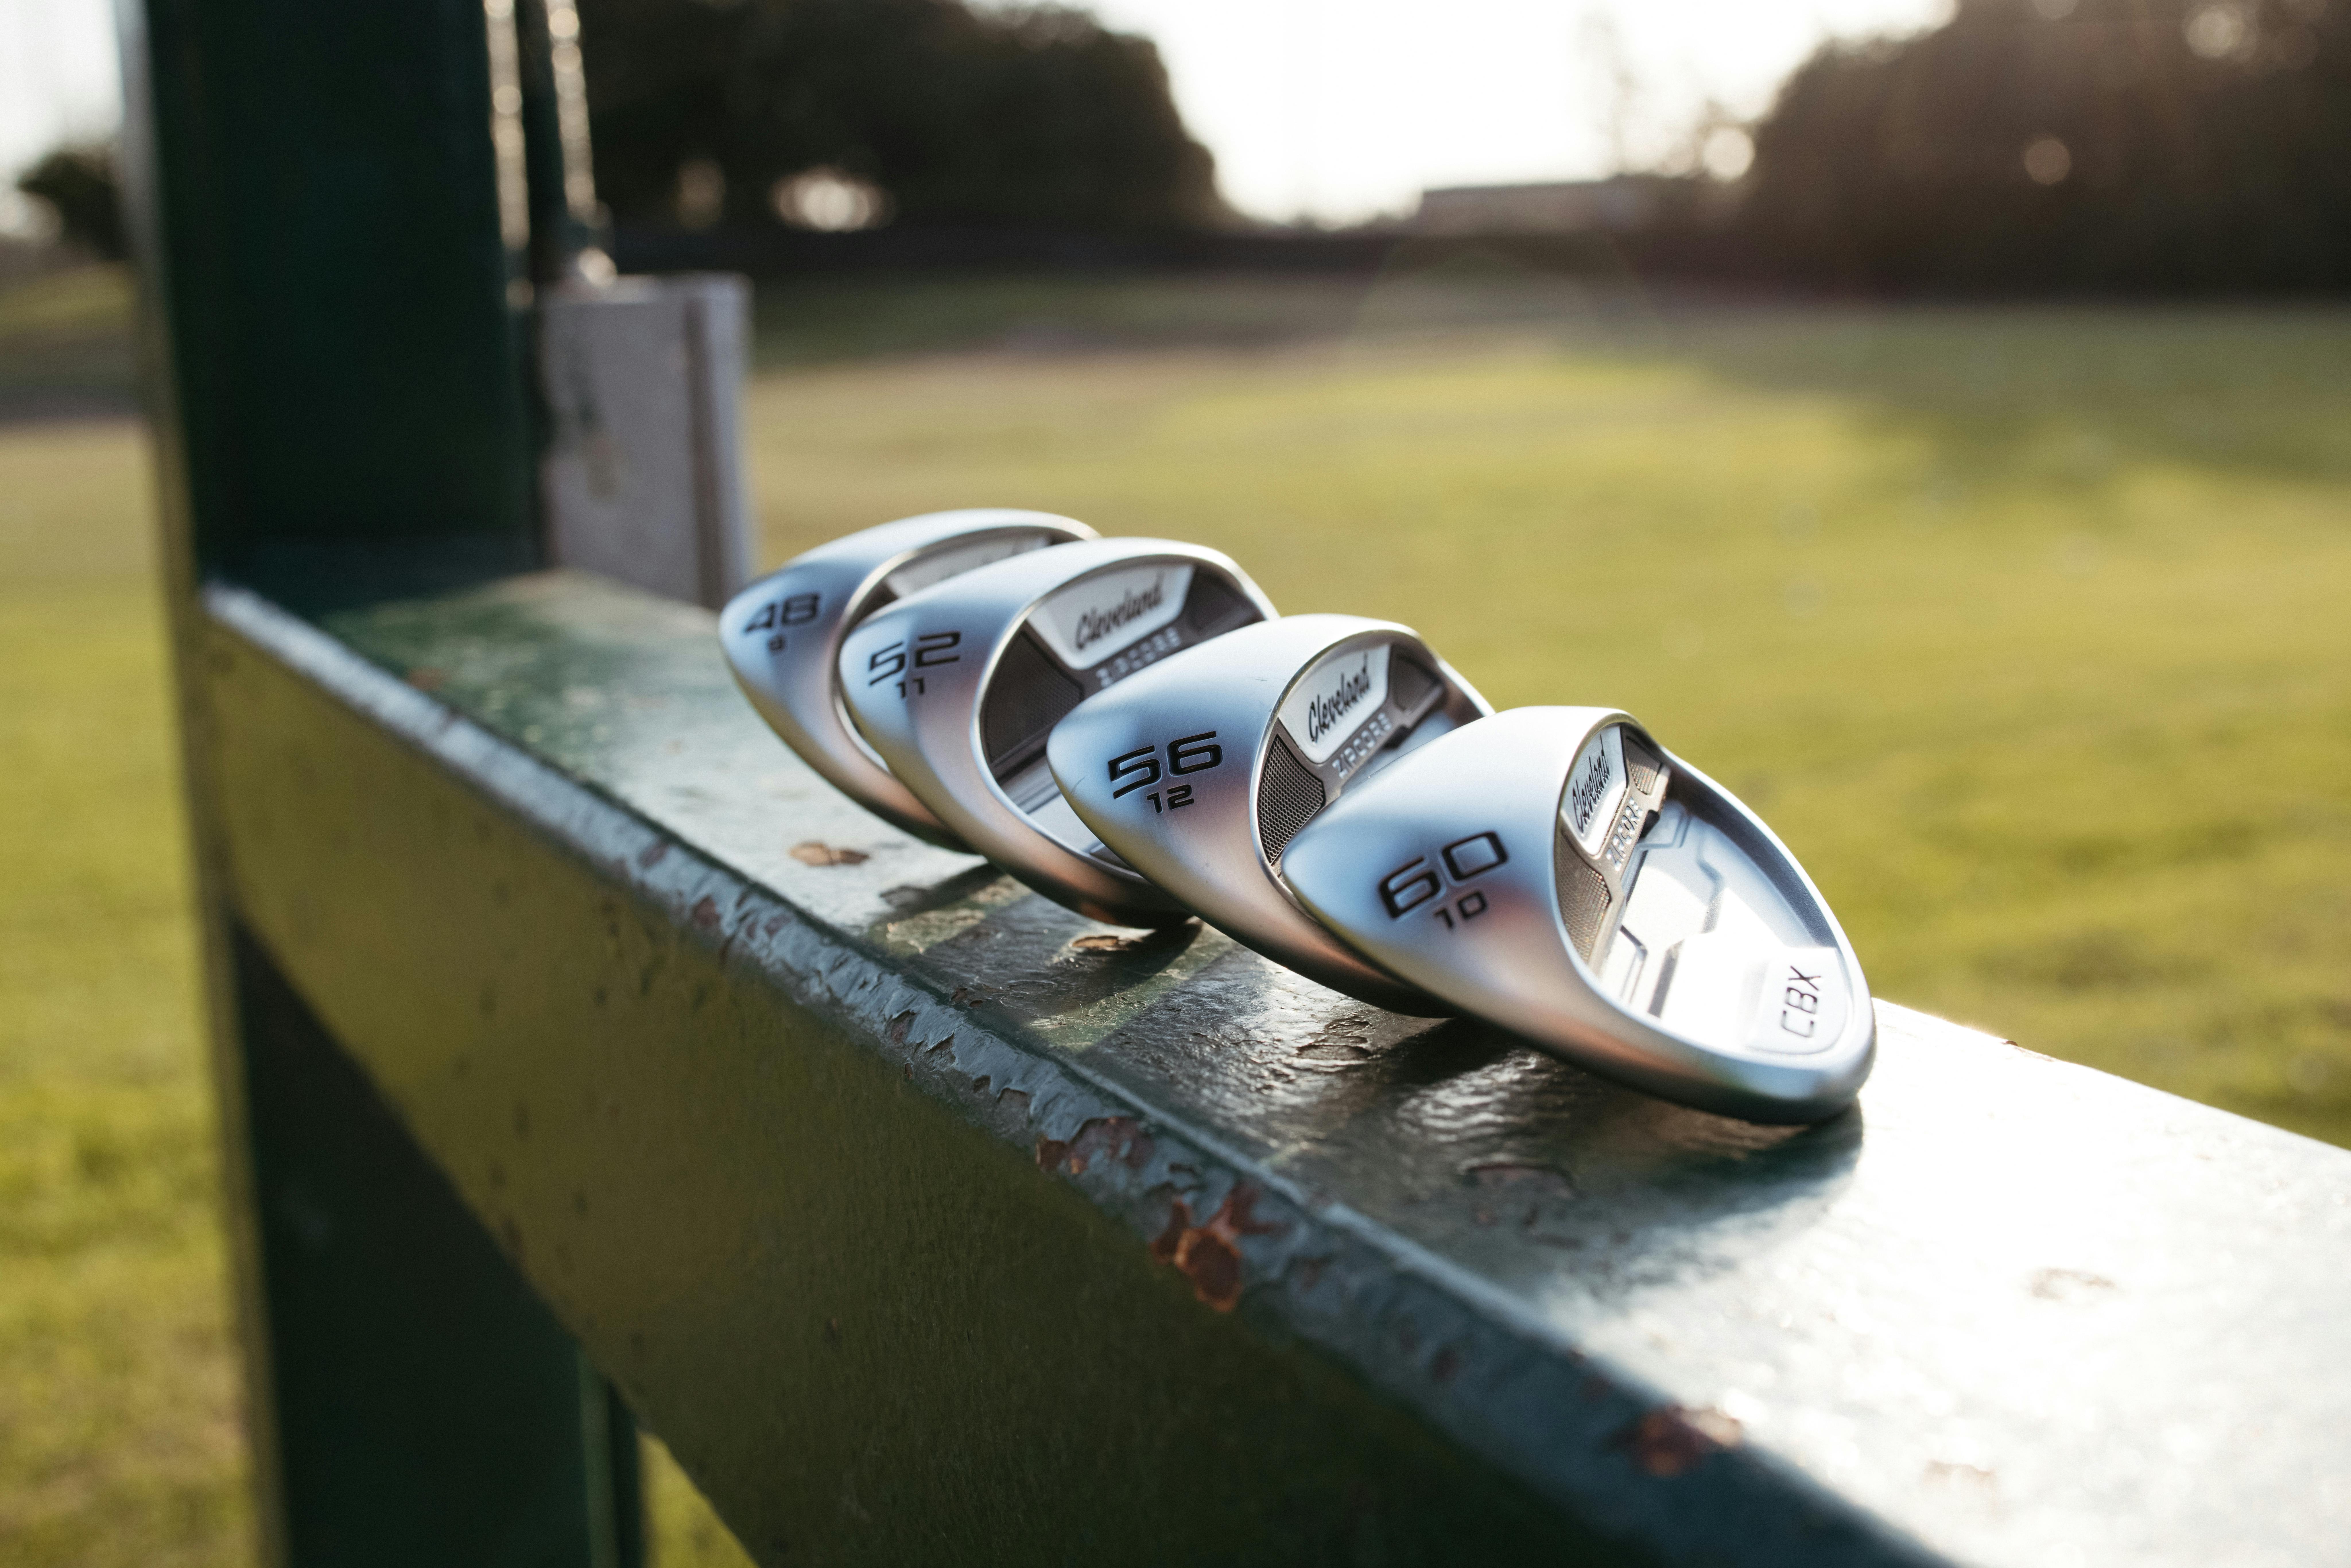 Cleveland CBX Zipcore Wedge · Right handed · Graphite · 60° · 10° · Chrome